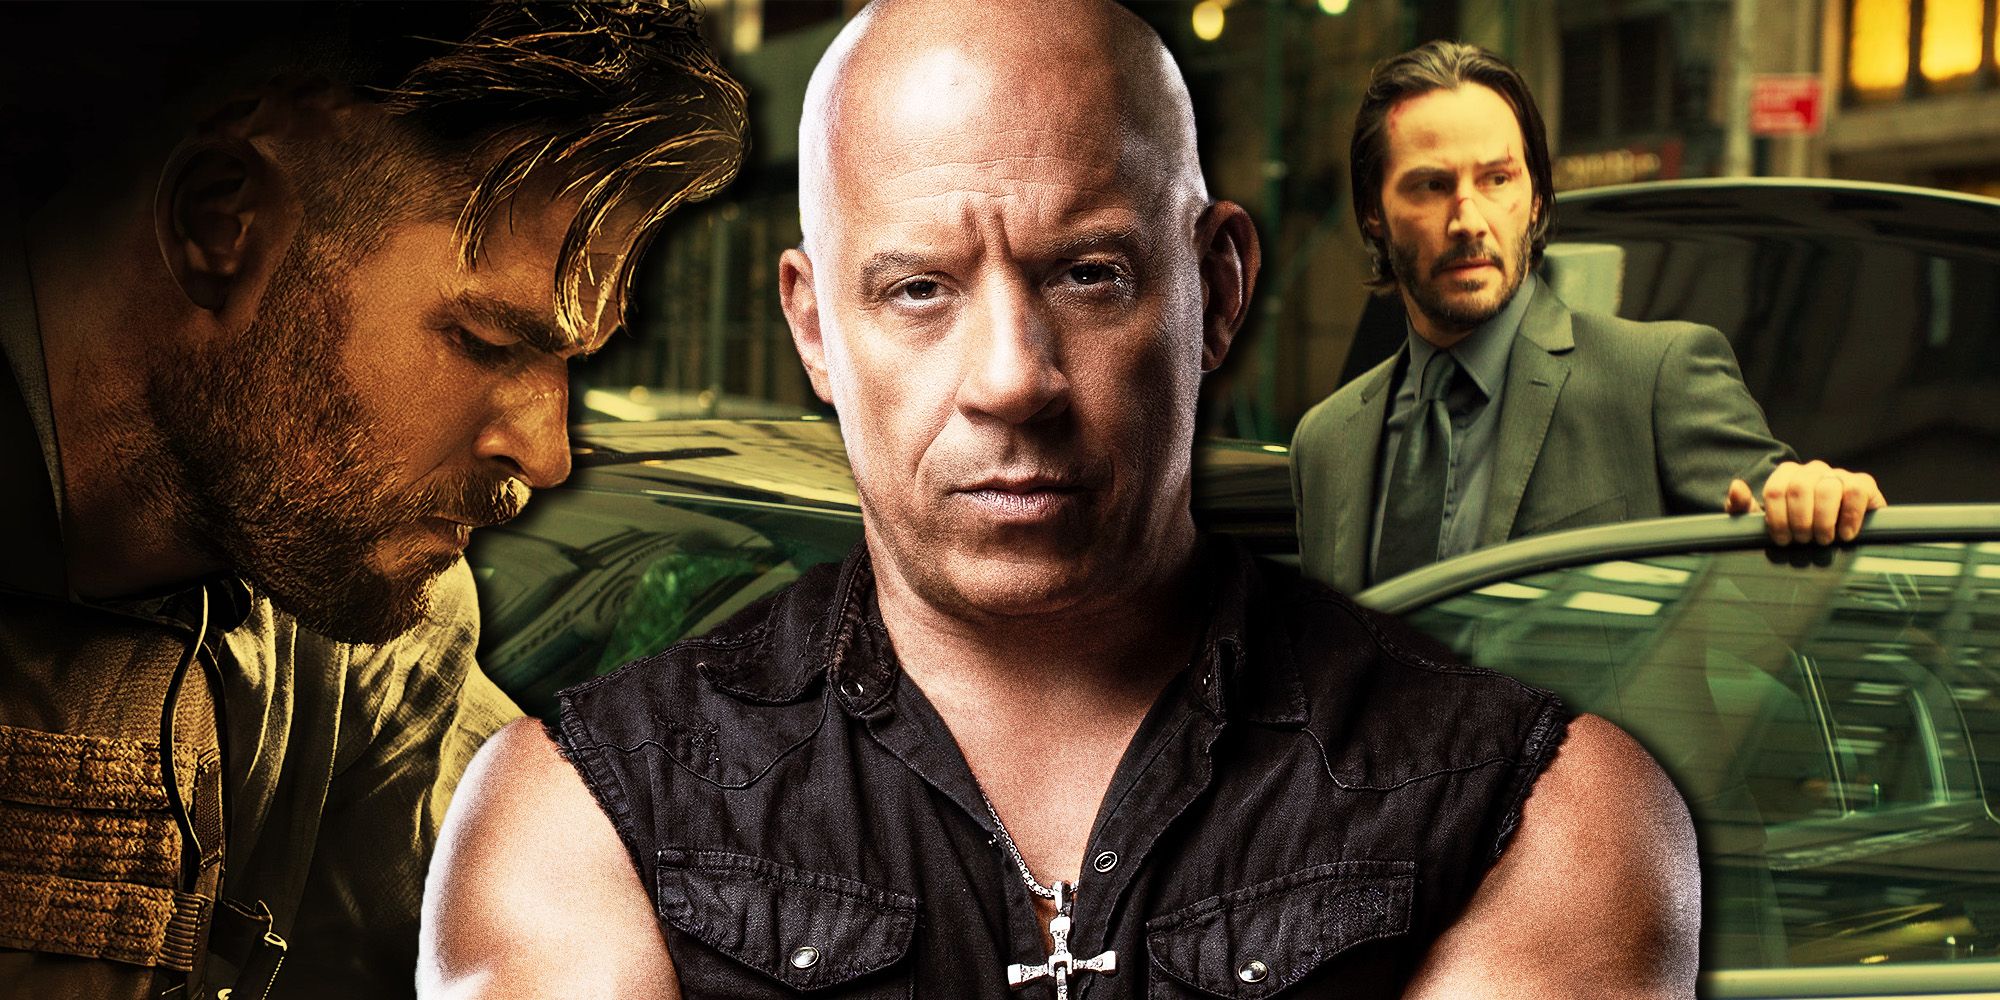 Fast Furious 11 action movie stars cast perfect image